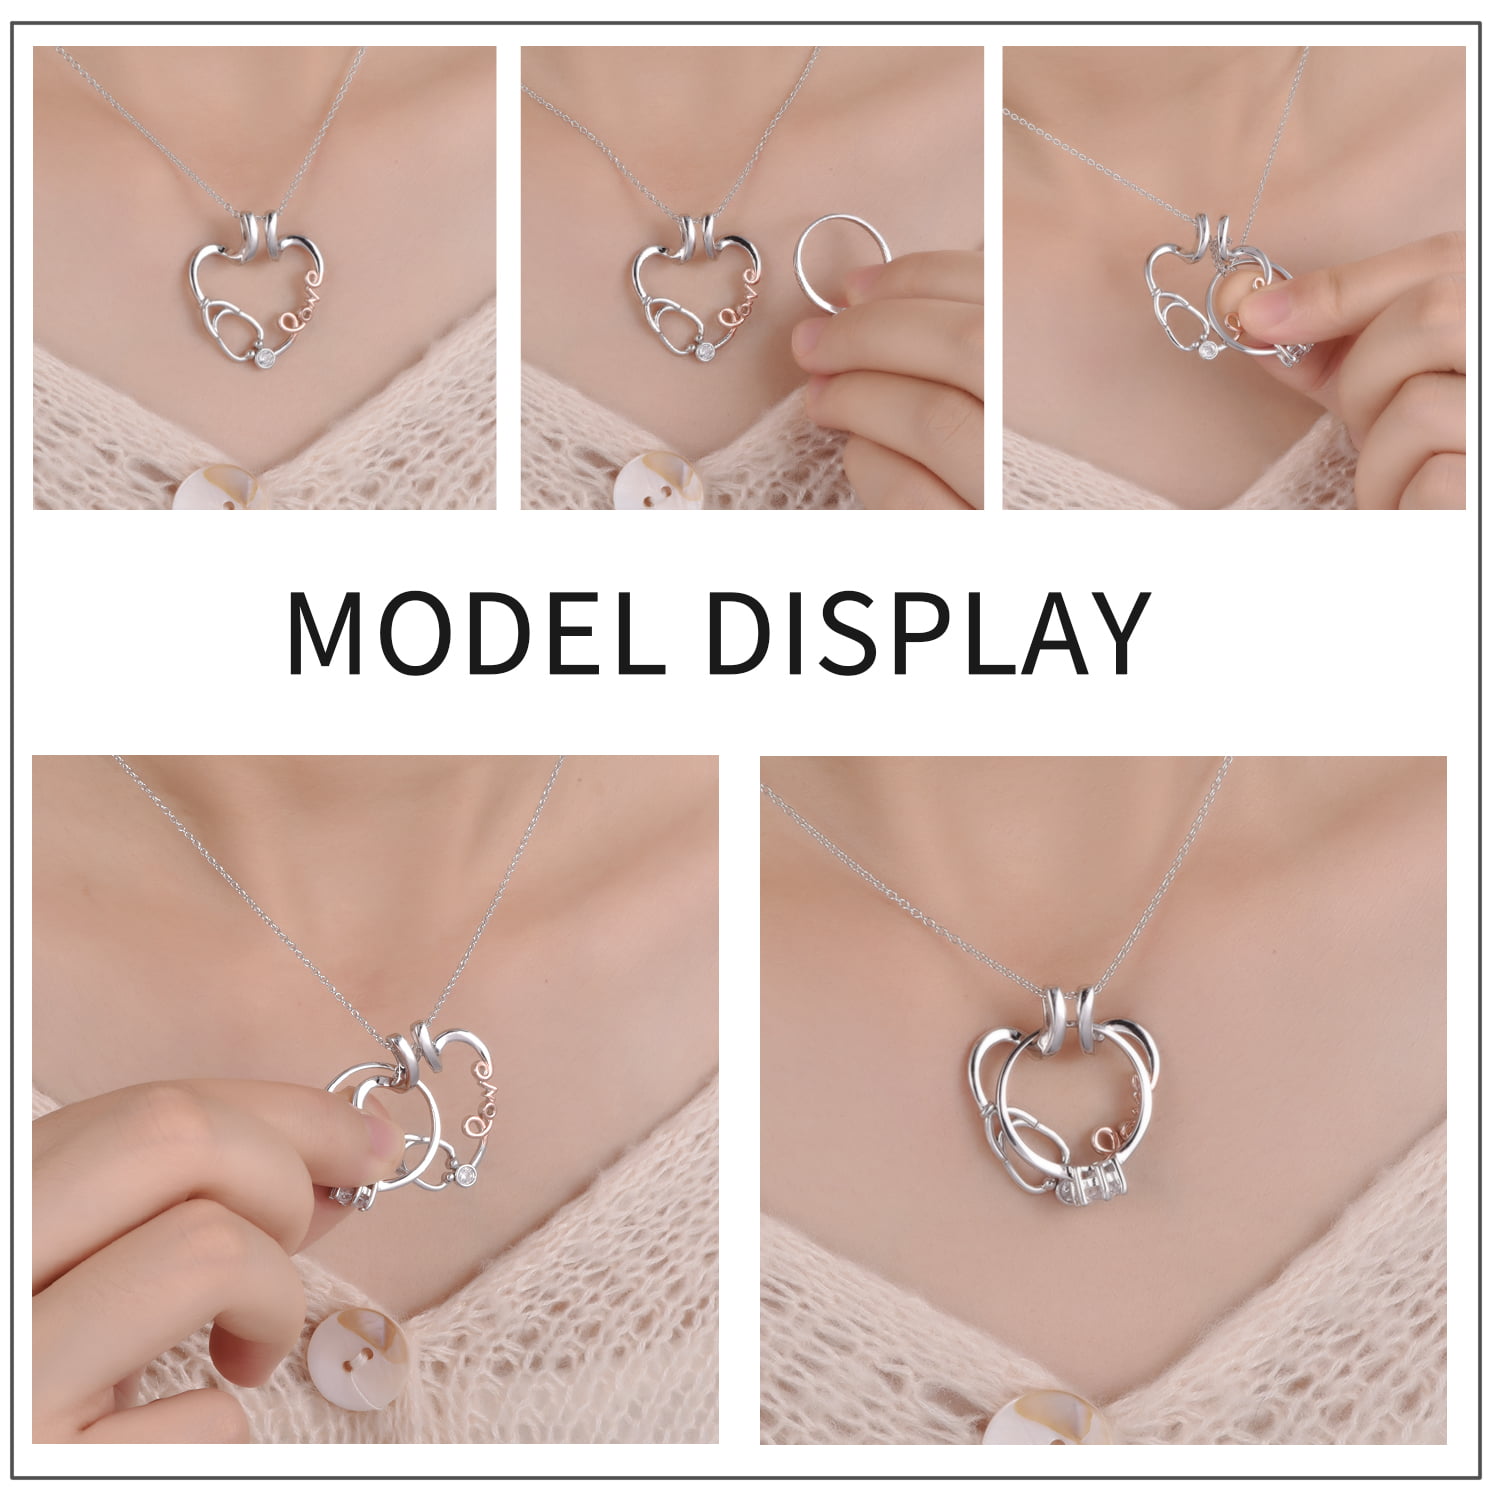 Ring Holder Necklace ⋆ Necklaces in Solid Silver